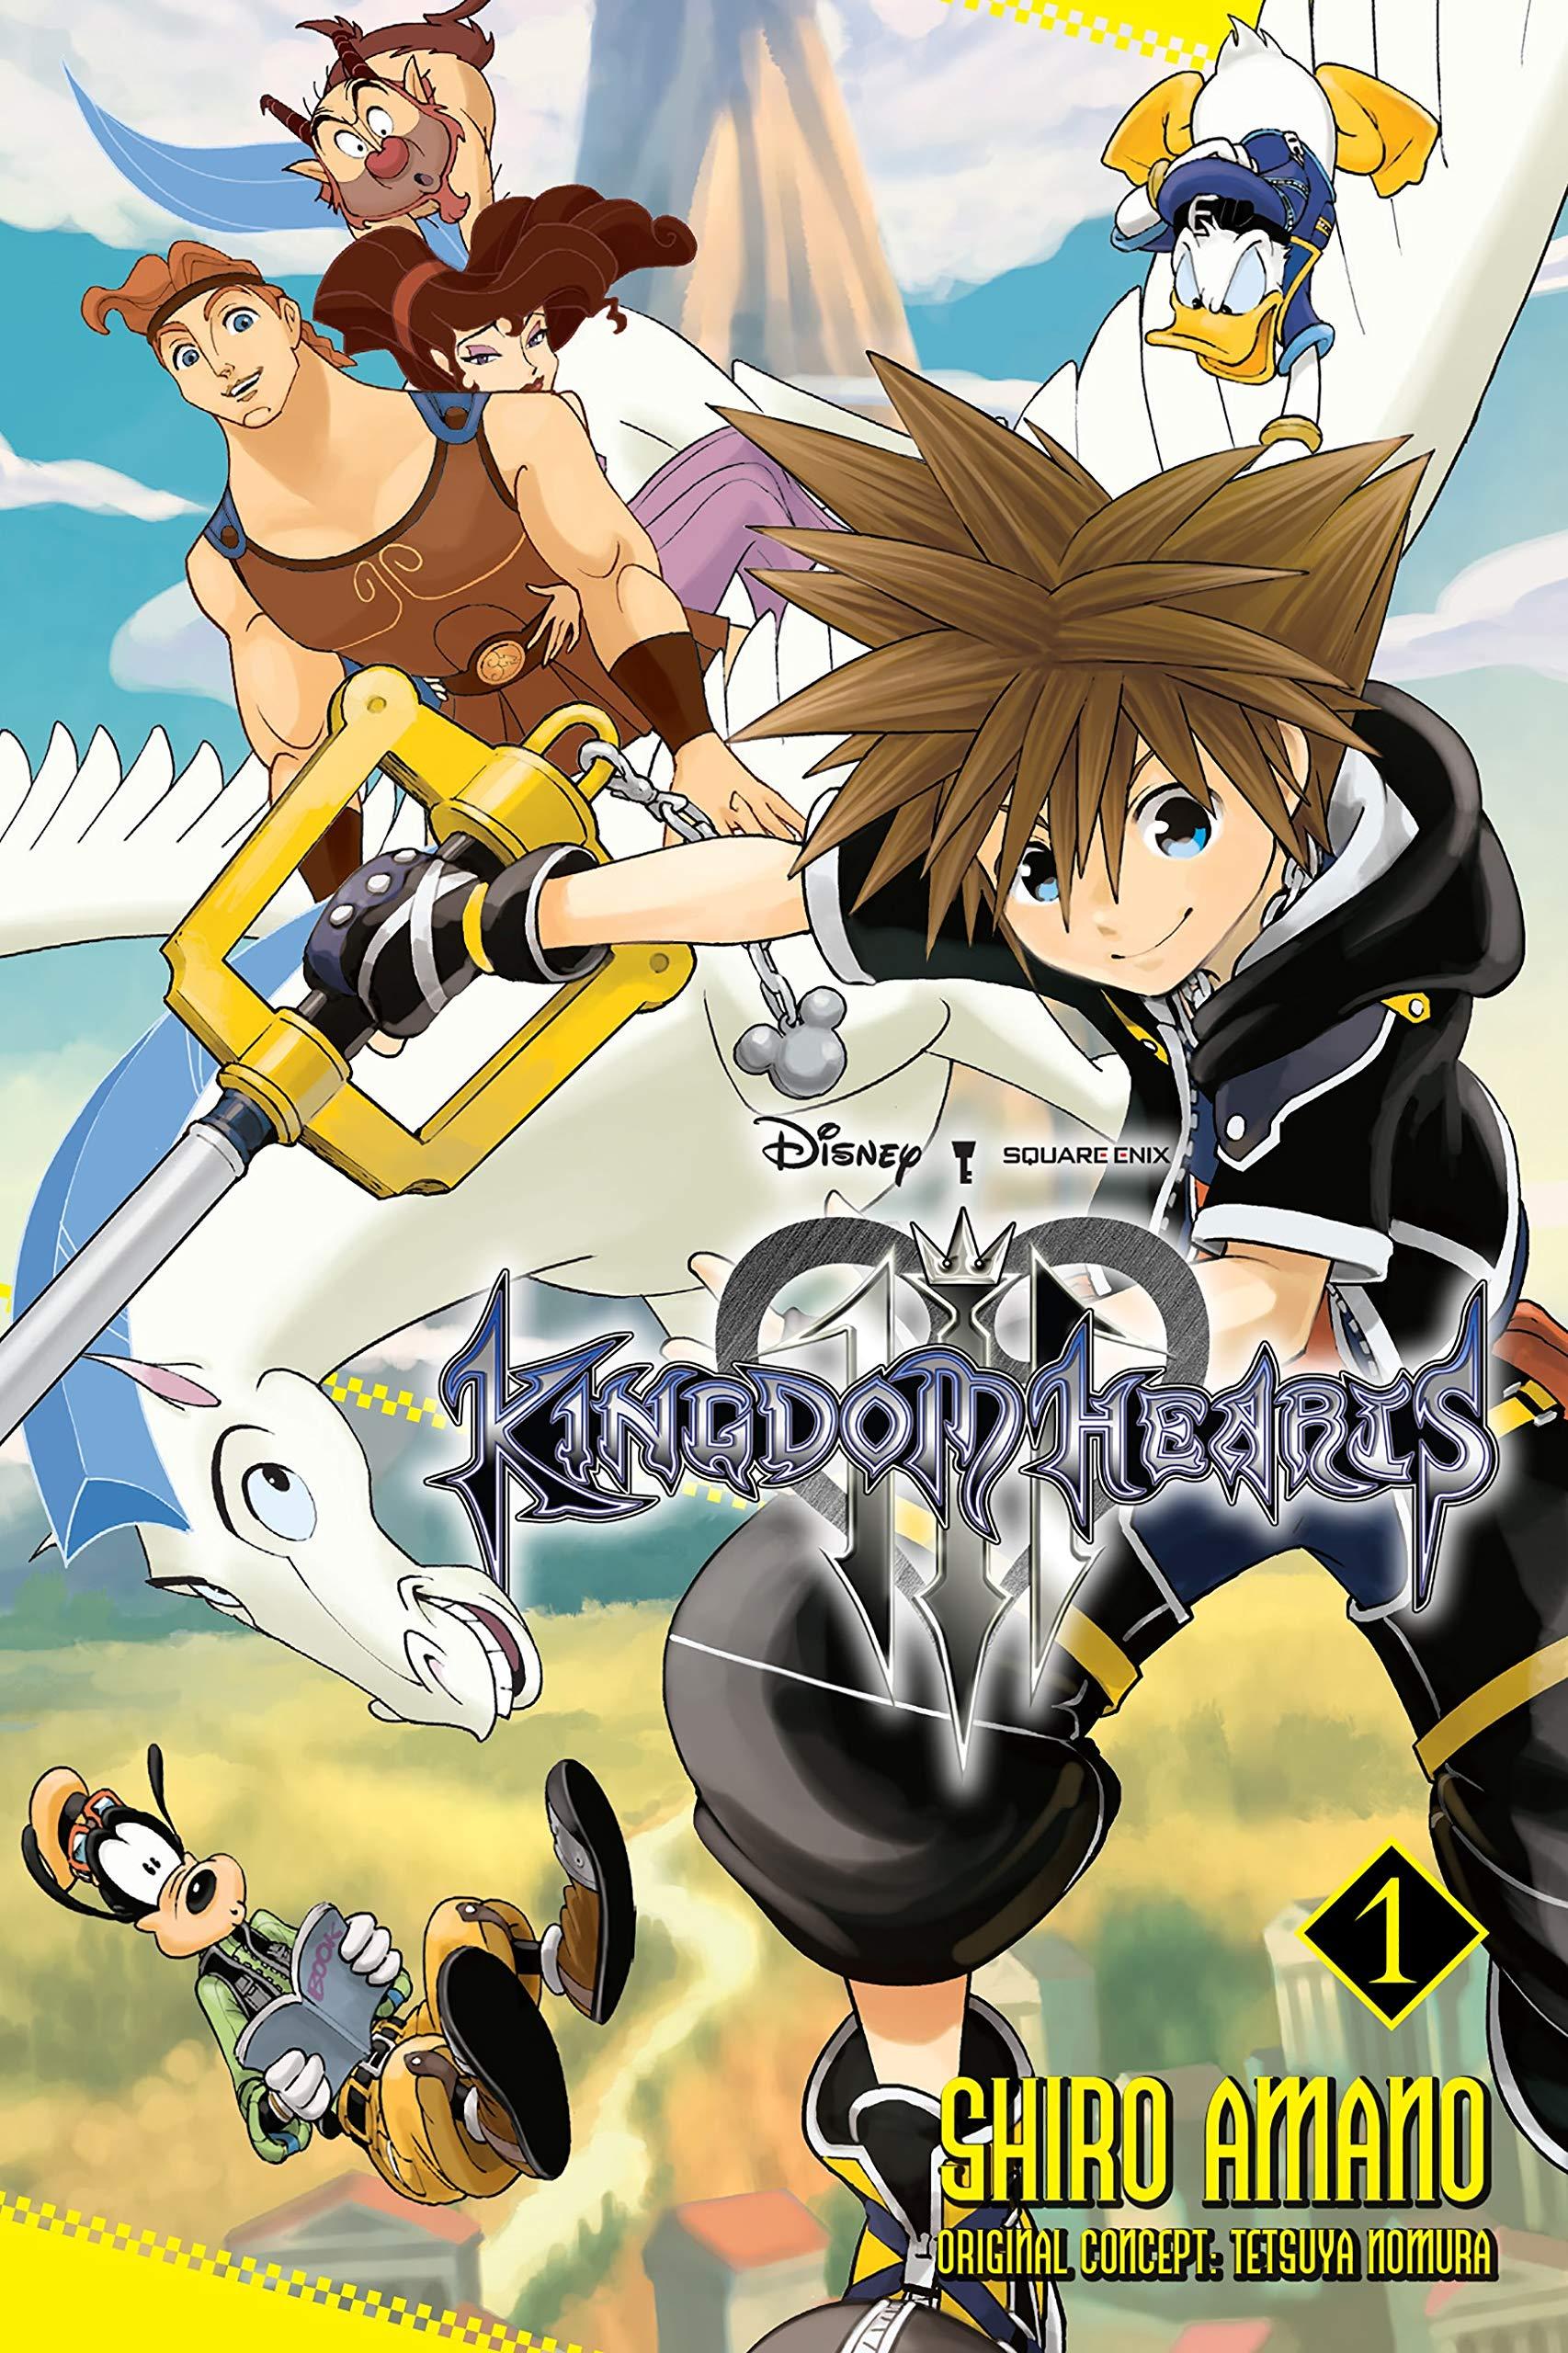 Kingdom Hearts Missing-Link is now accepting sign-ups for January beta test